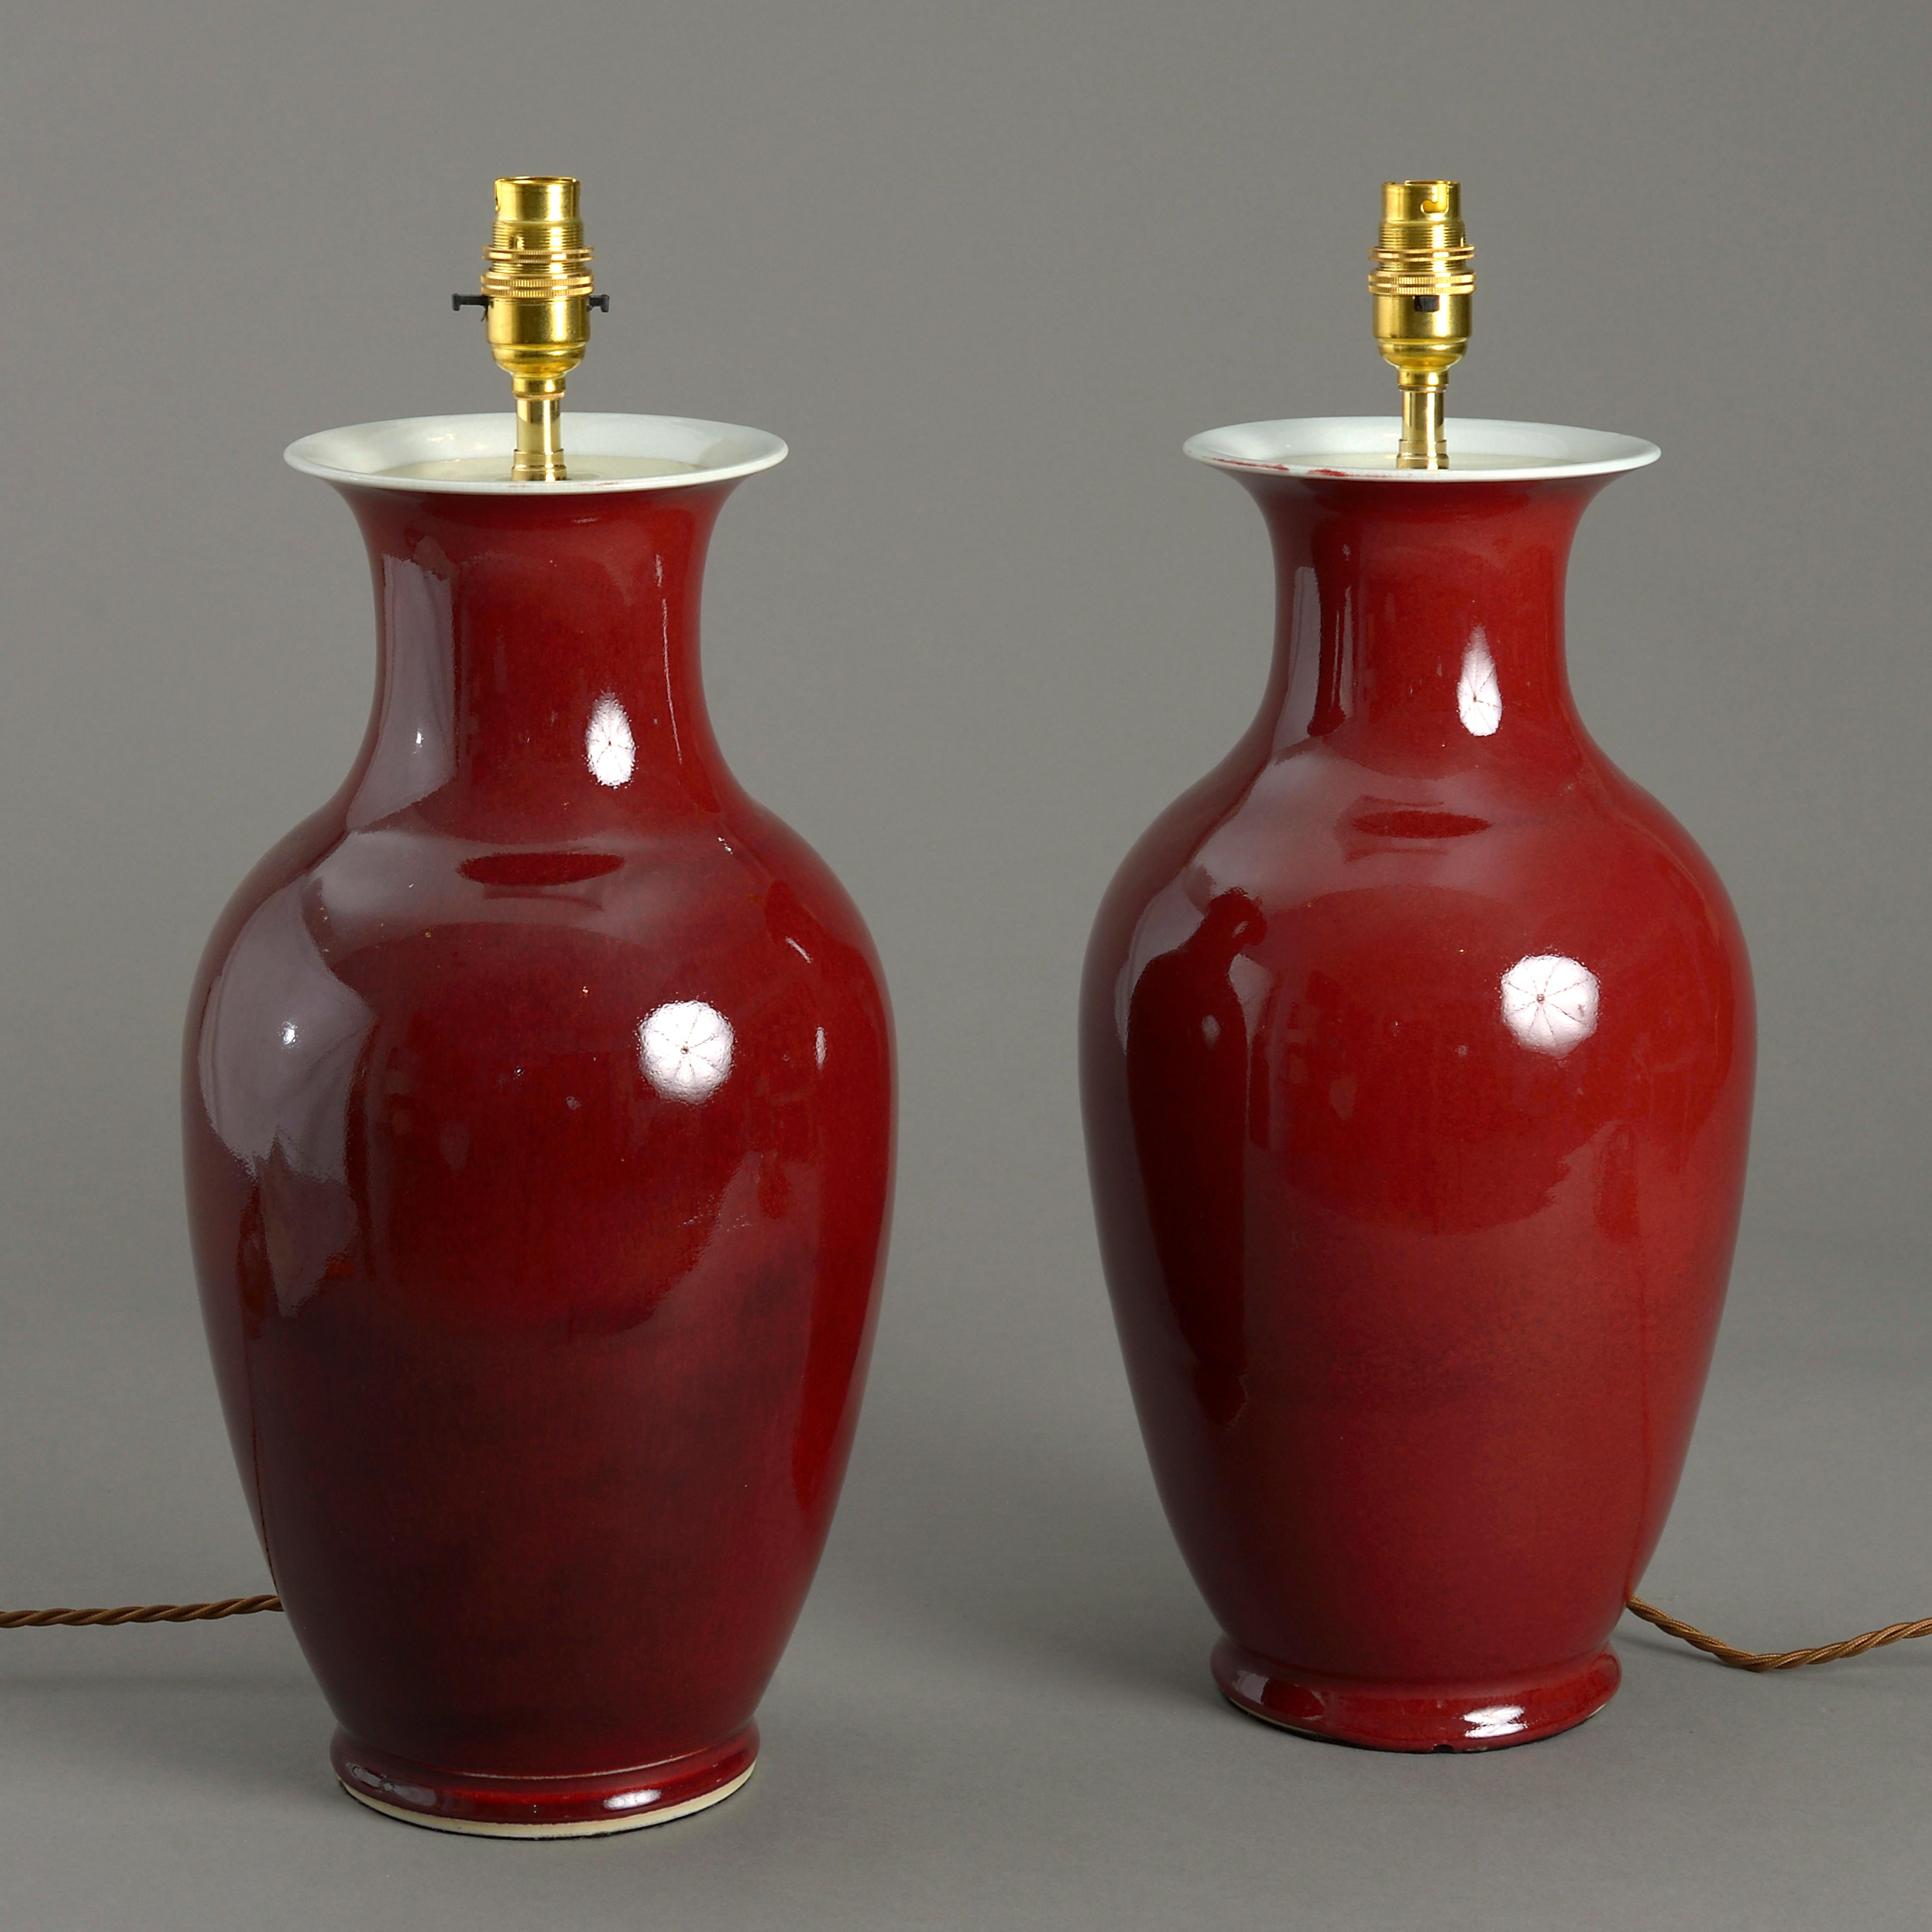 A pair of sang de boeuf glazed porcelain vases, of baluster form, now wired as table lamps.

Dimensions refer only to height of vases excluding electrical components.